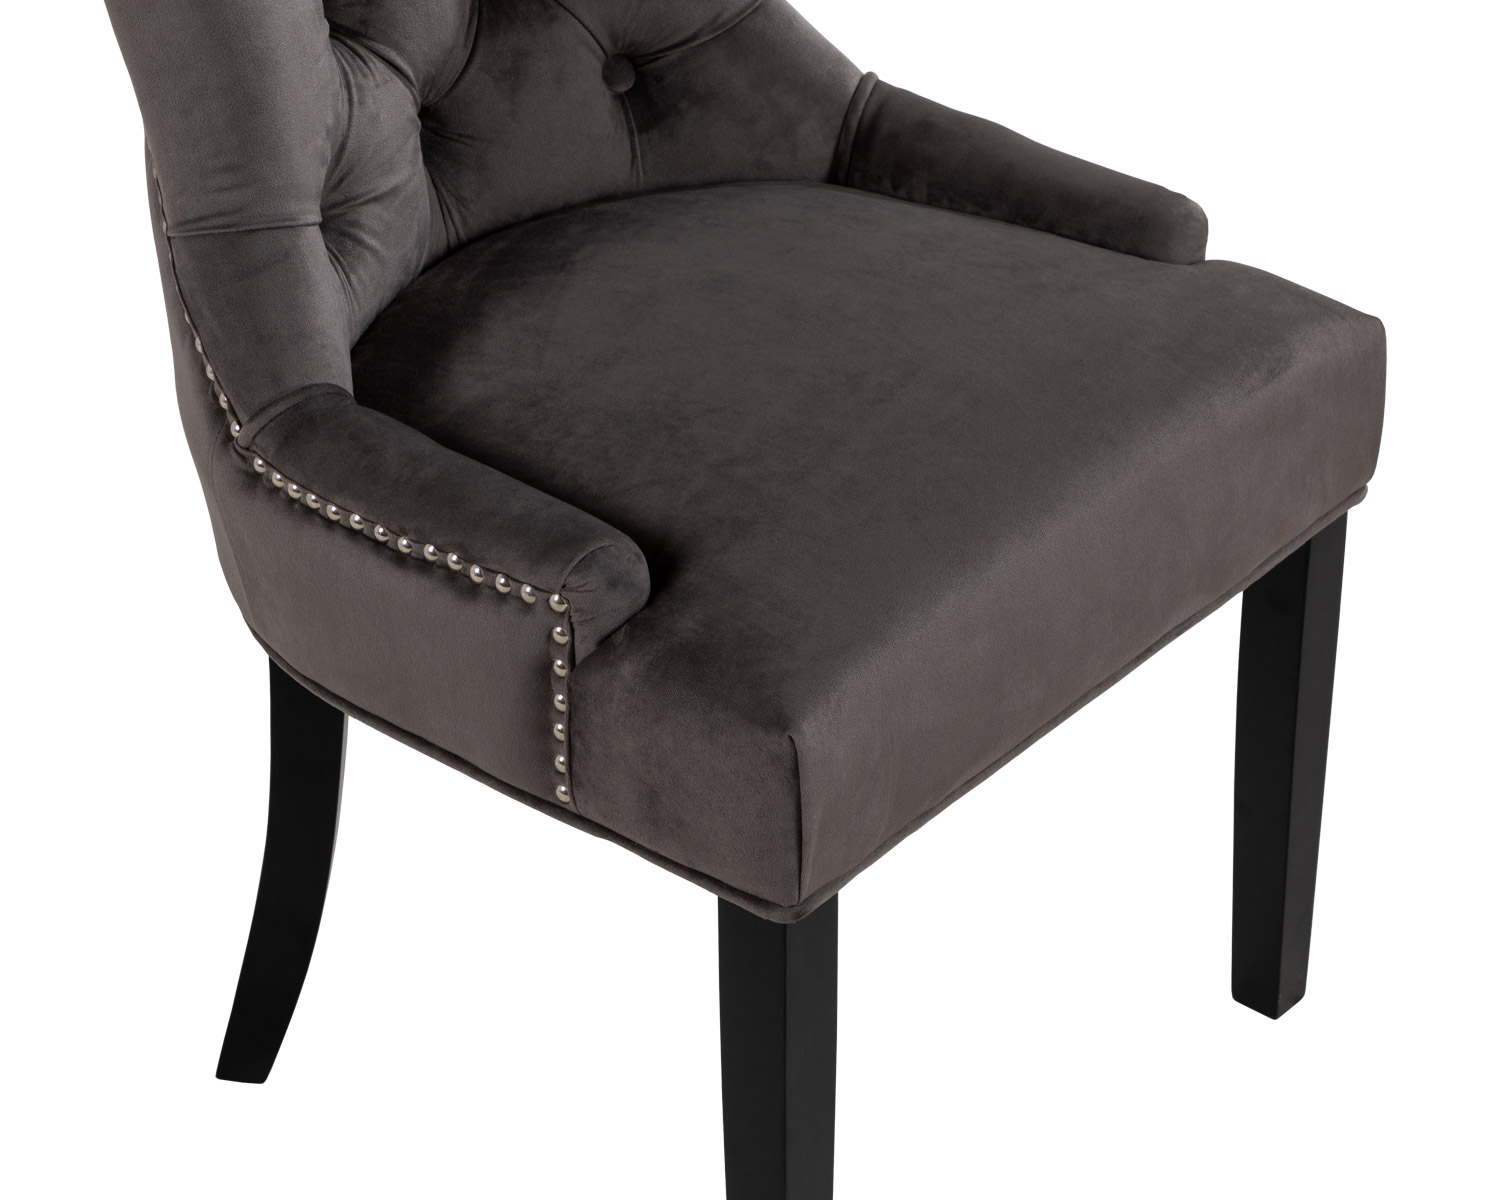 Grey Dining Room Chairs With Black Legs - Draw-spatula